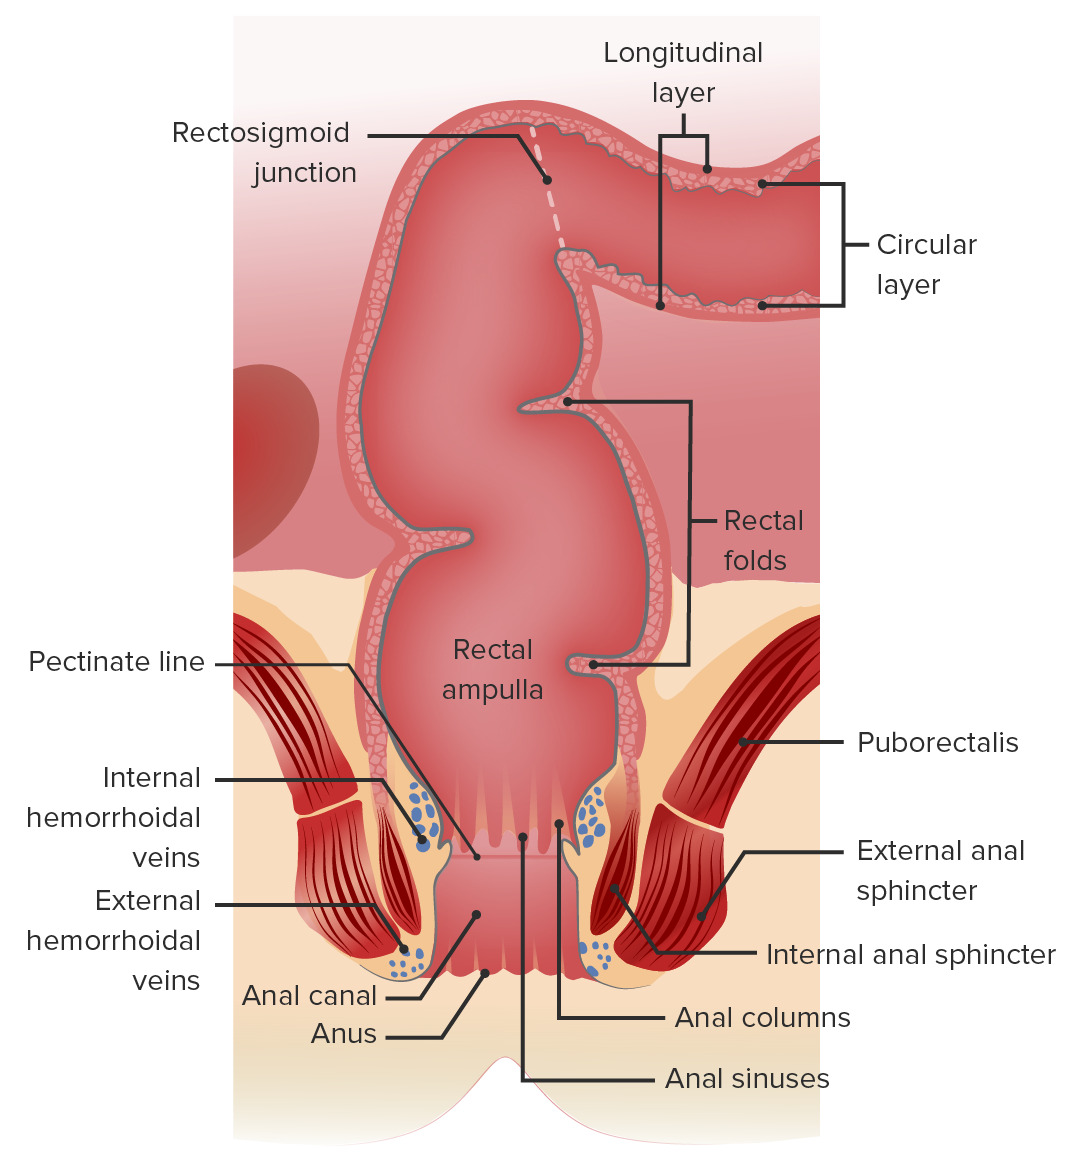 Gross anatomy of the rectum and anal canal